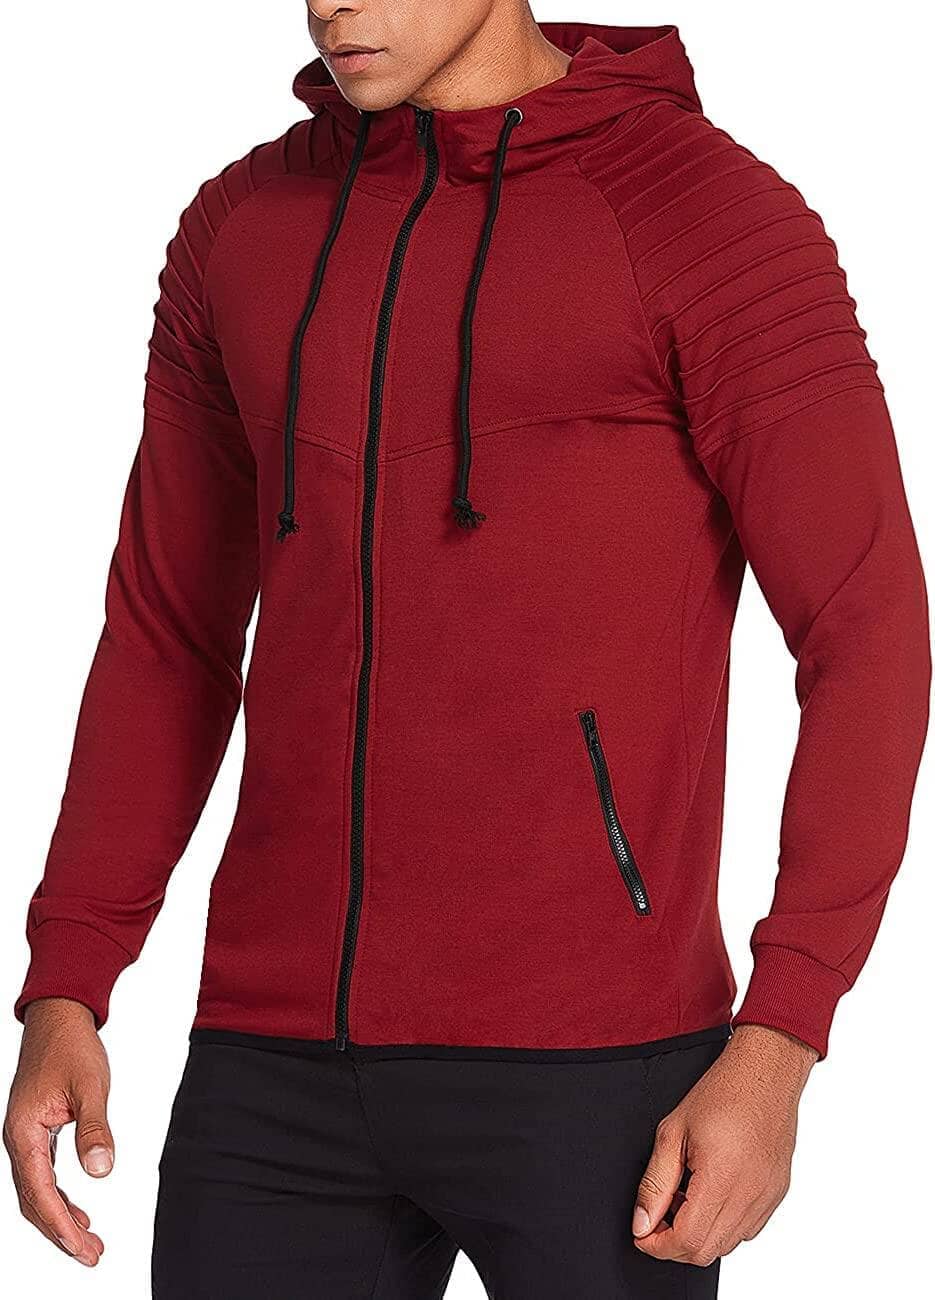 Fashion Long Sleeve Hooded With Zipper Pocket (US Only) Hoodies Coofandy's Wine Red S 